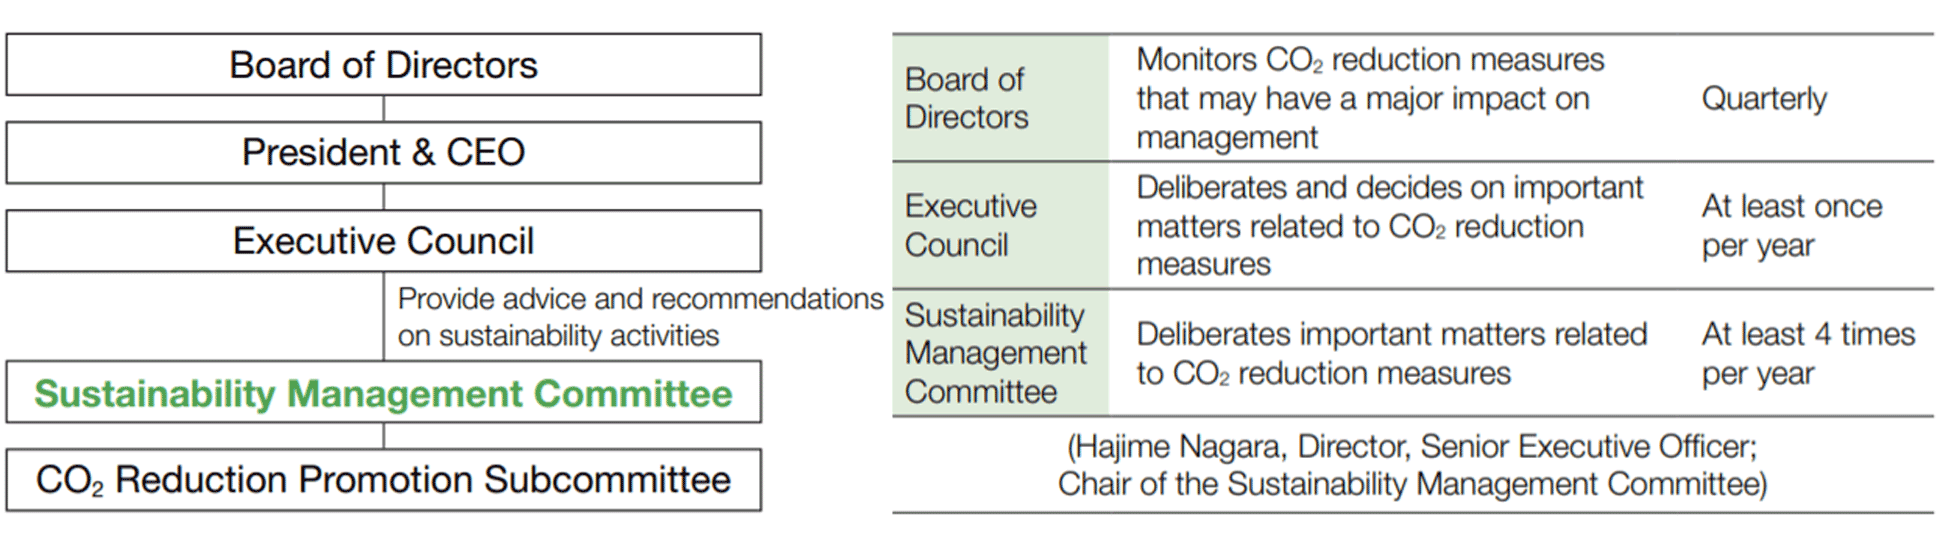 Climate-Related governance structure